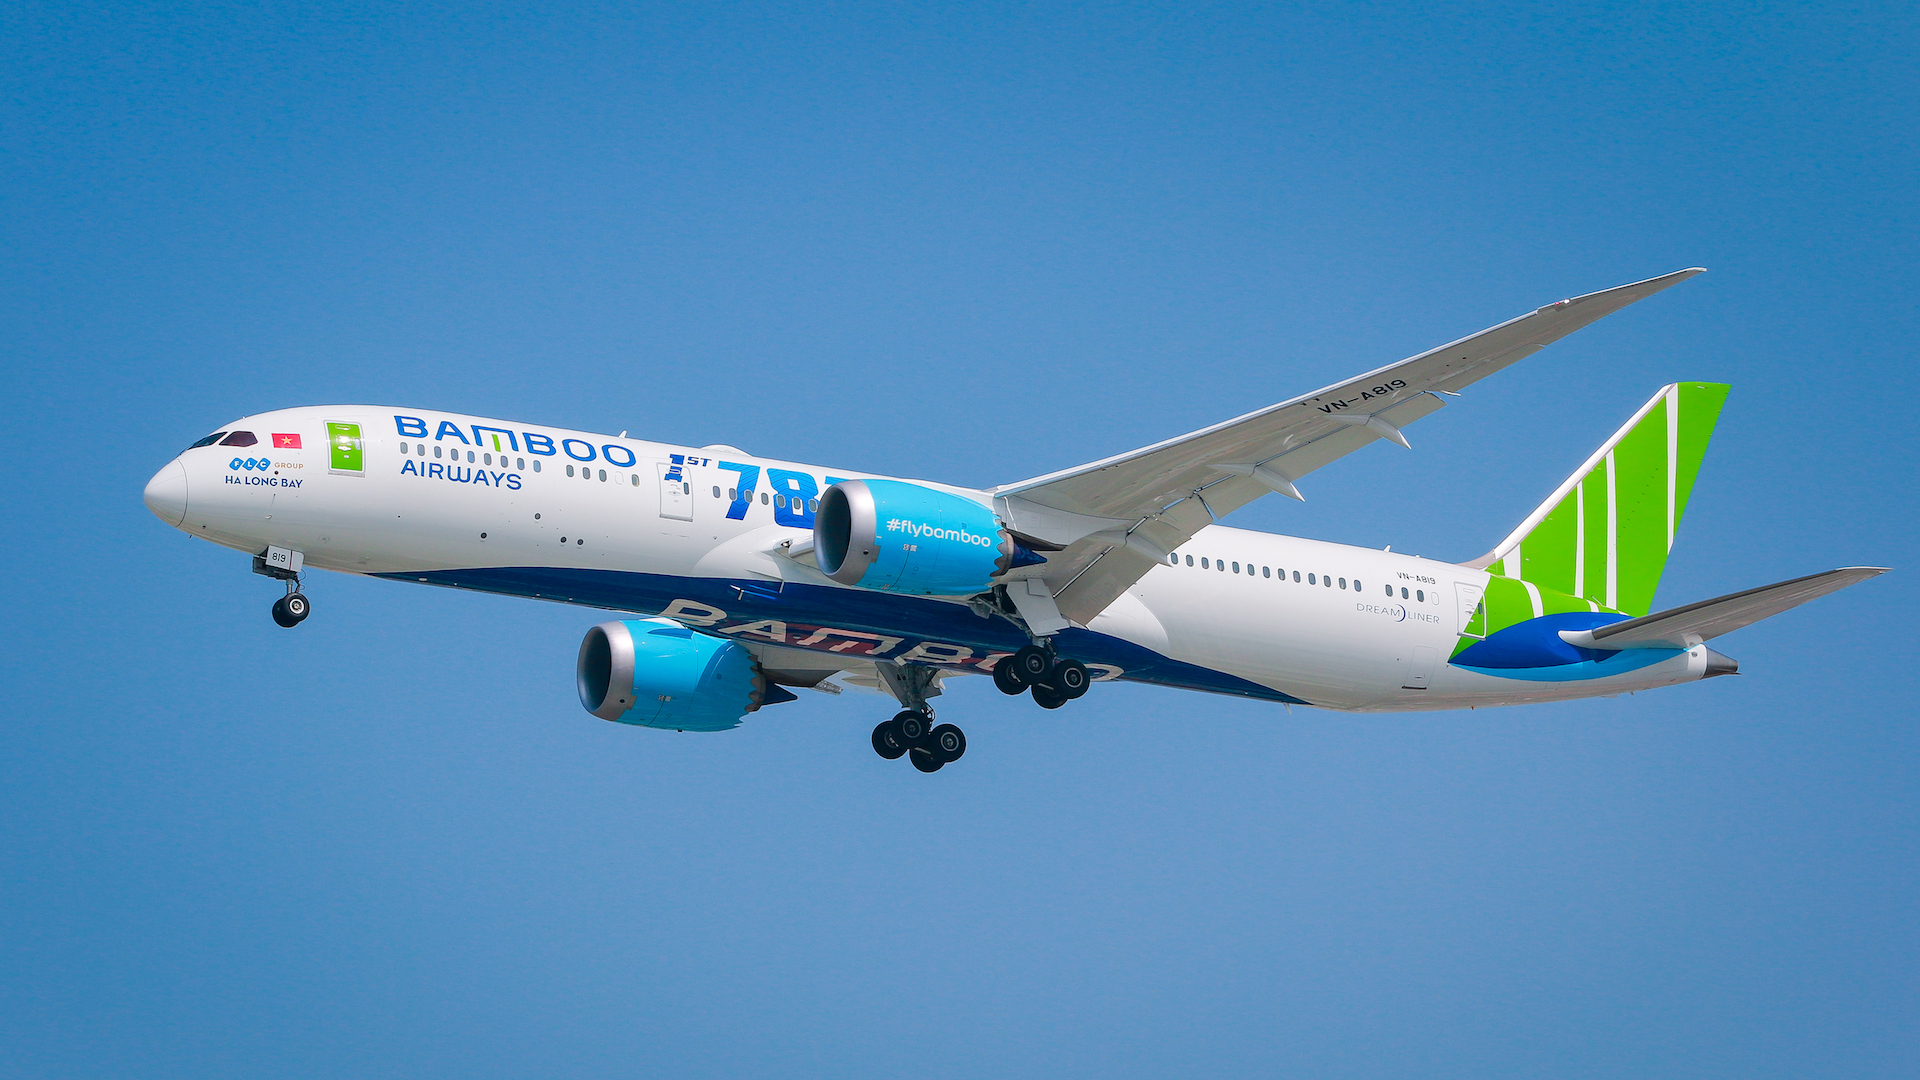 Bamboo Airways selects Amadeus’ technology solutions